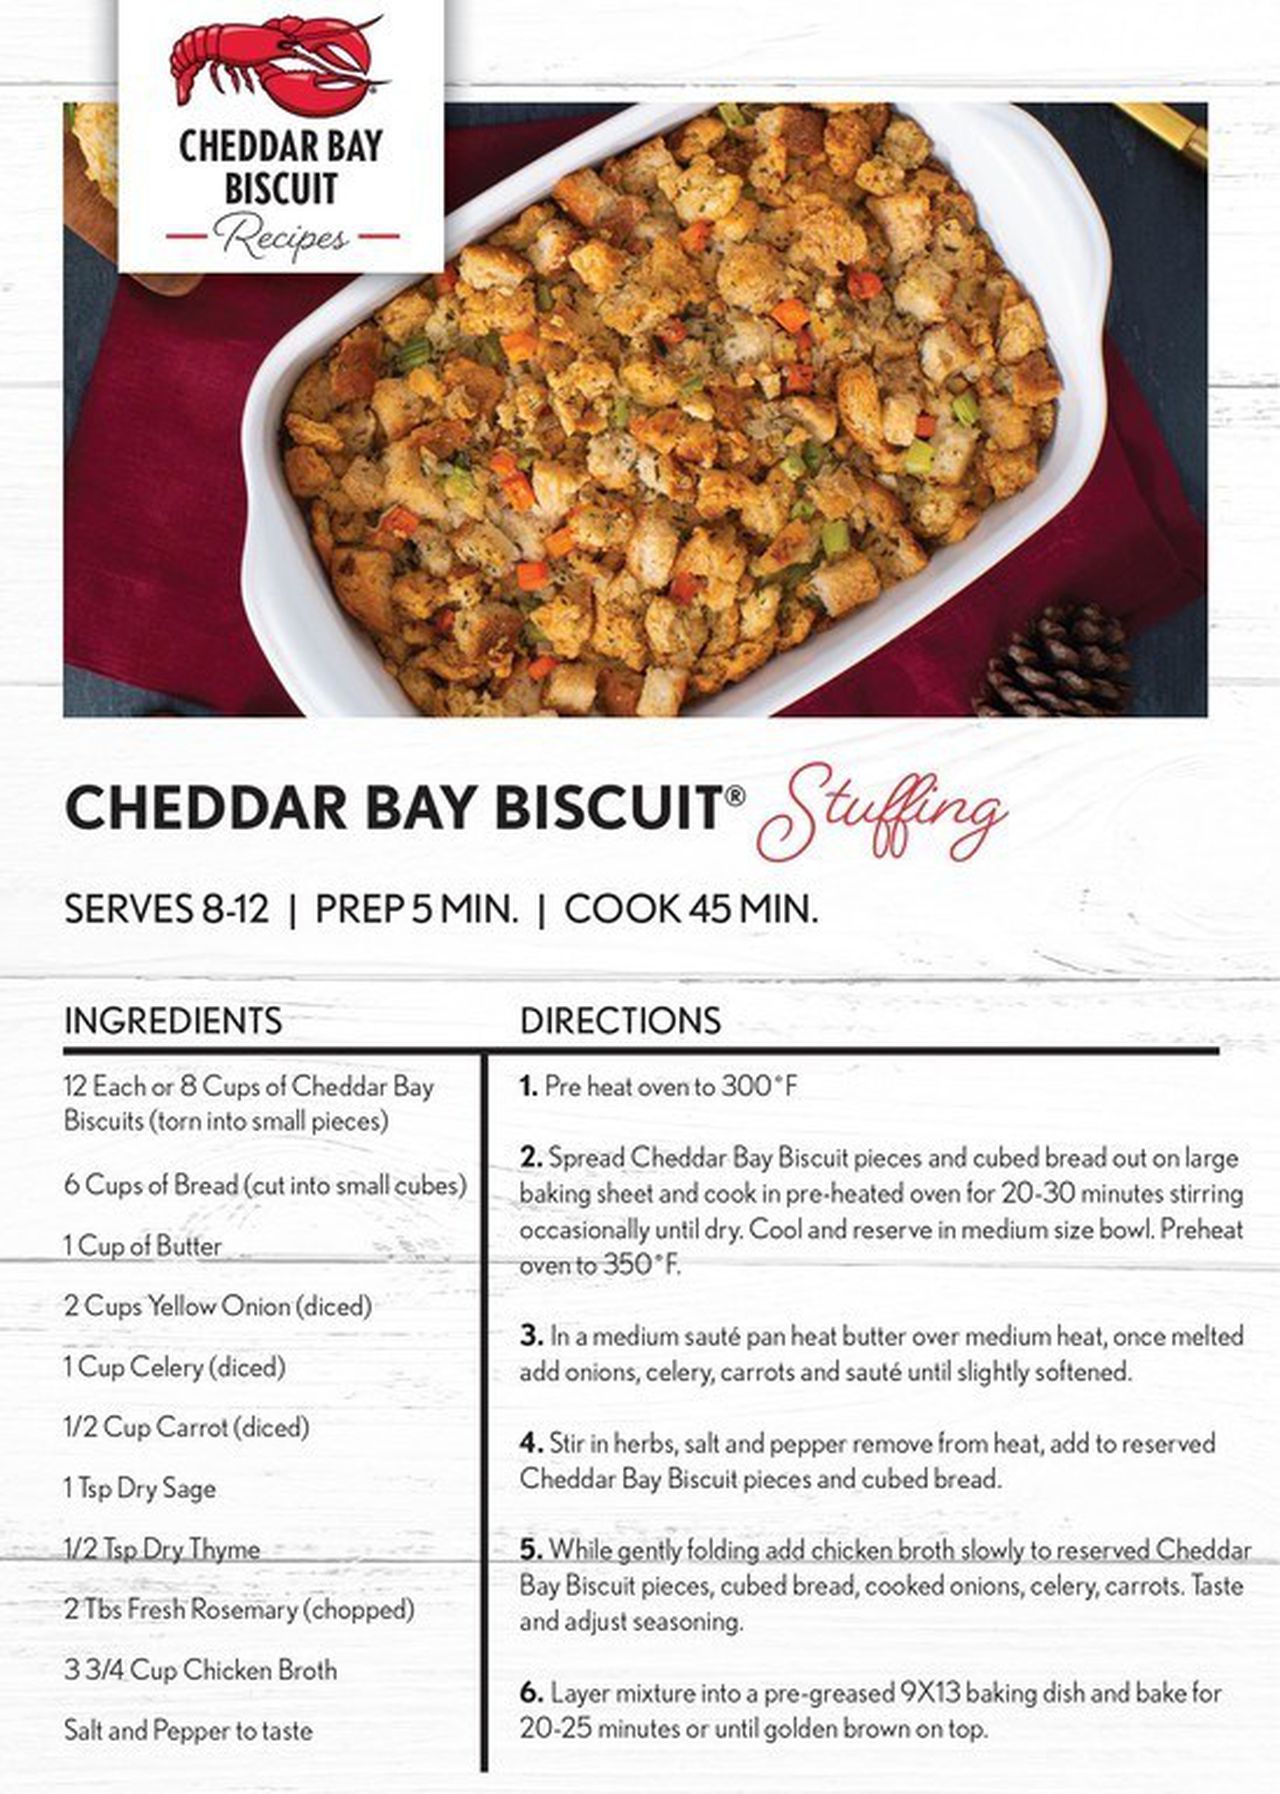 Red Lobster Seafood Stuffing Recipe